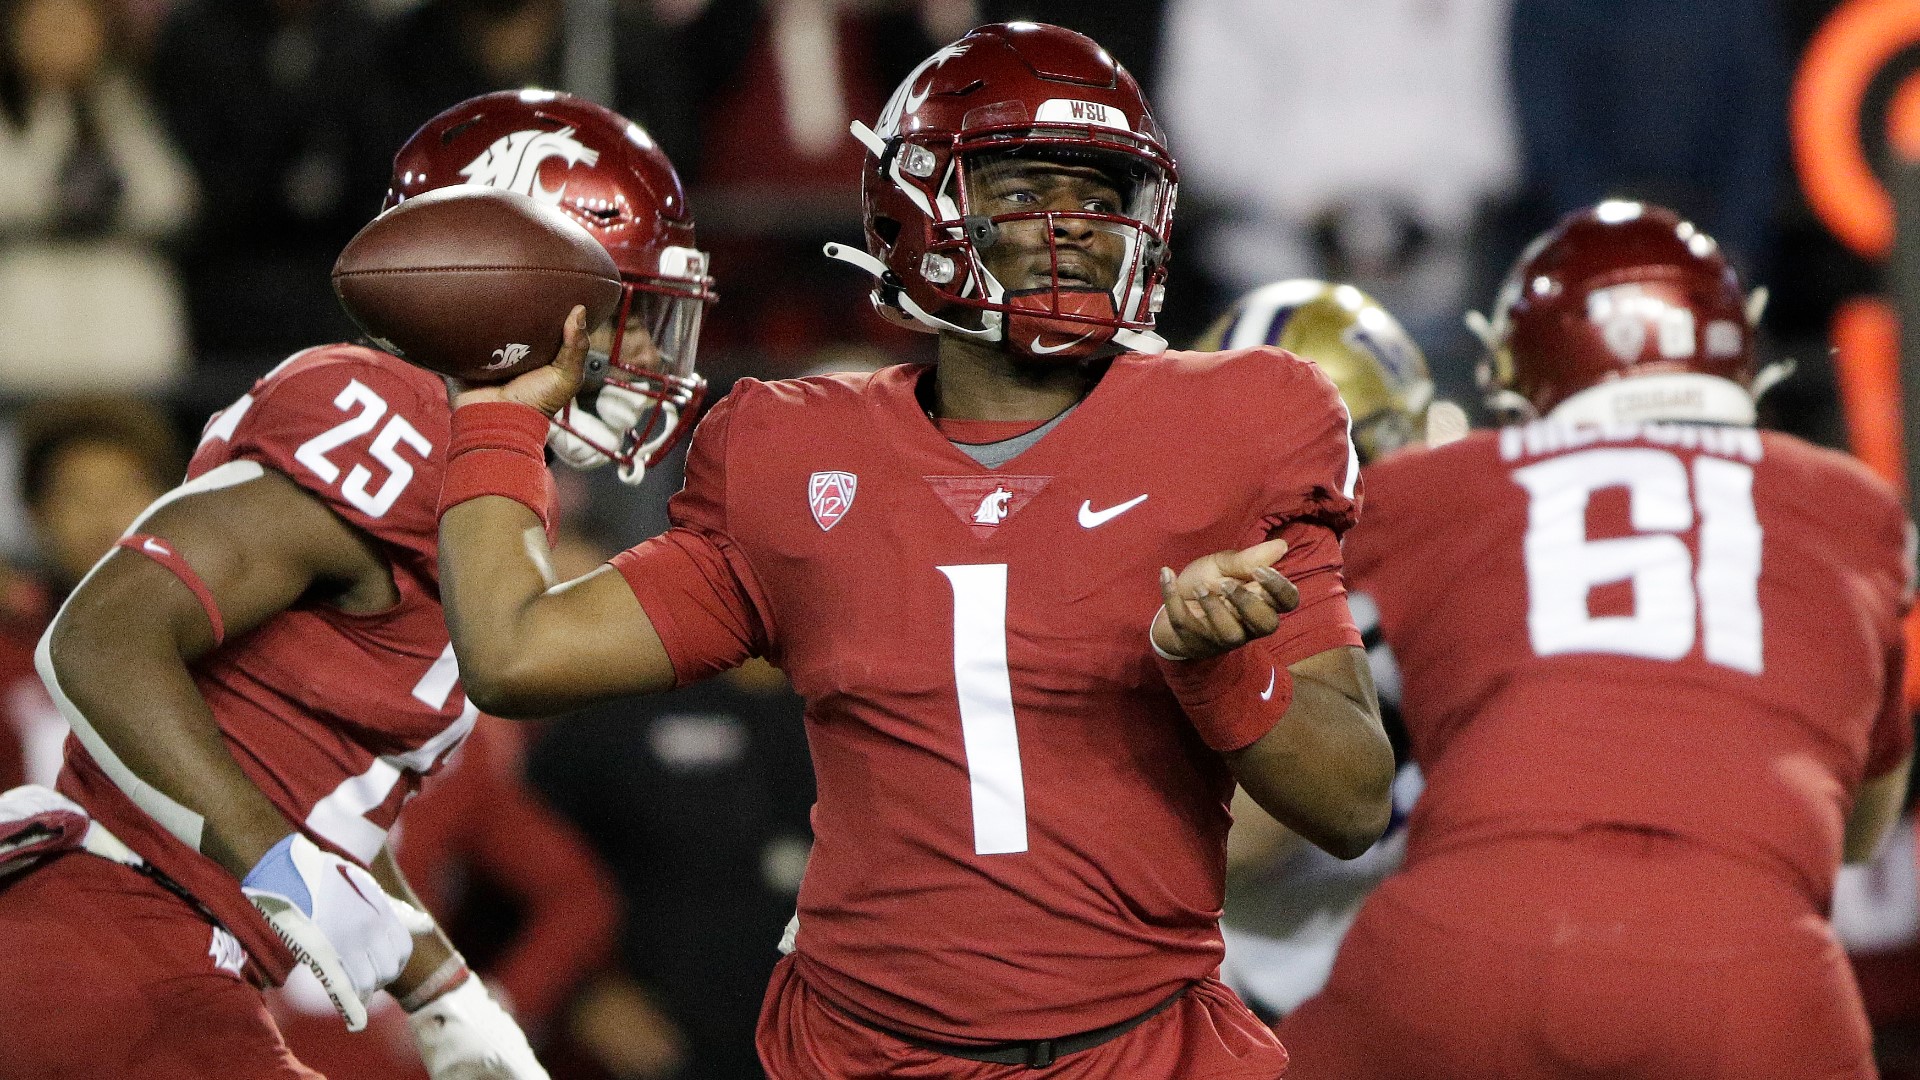 Ward's first season in Pullman proved he was the quarterback everyone thought the Cougs were getting as a highly touted transfer.